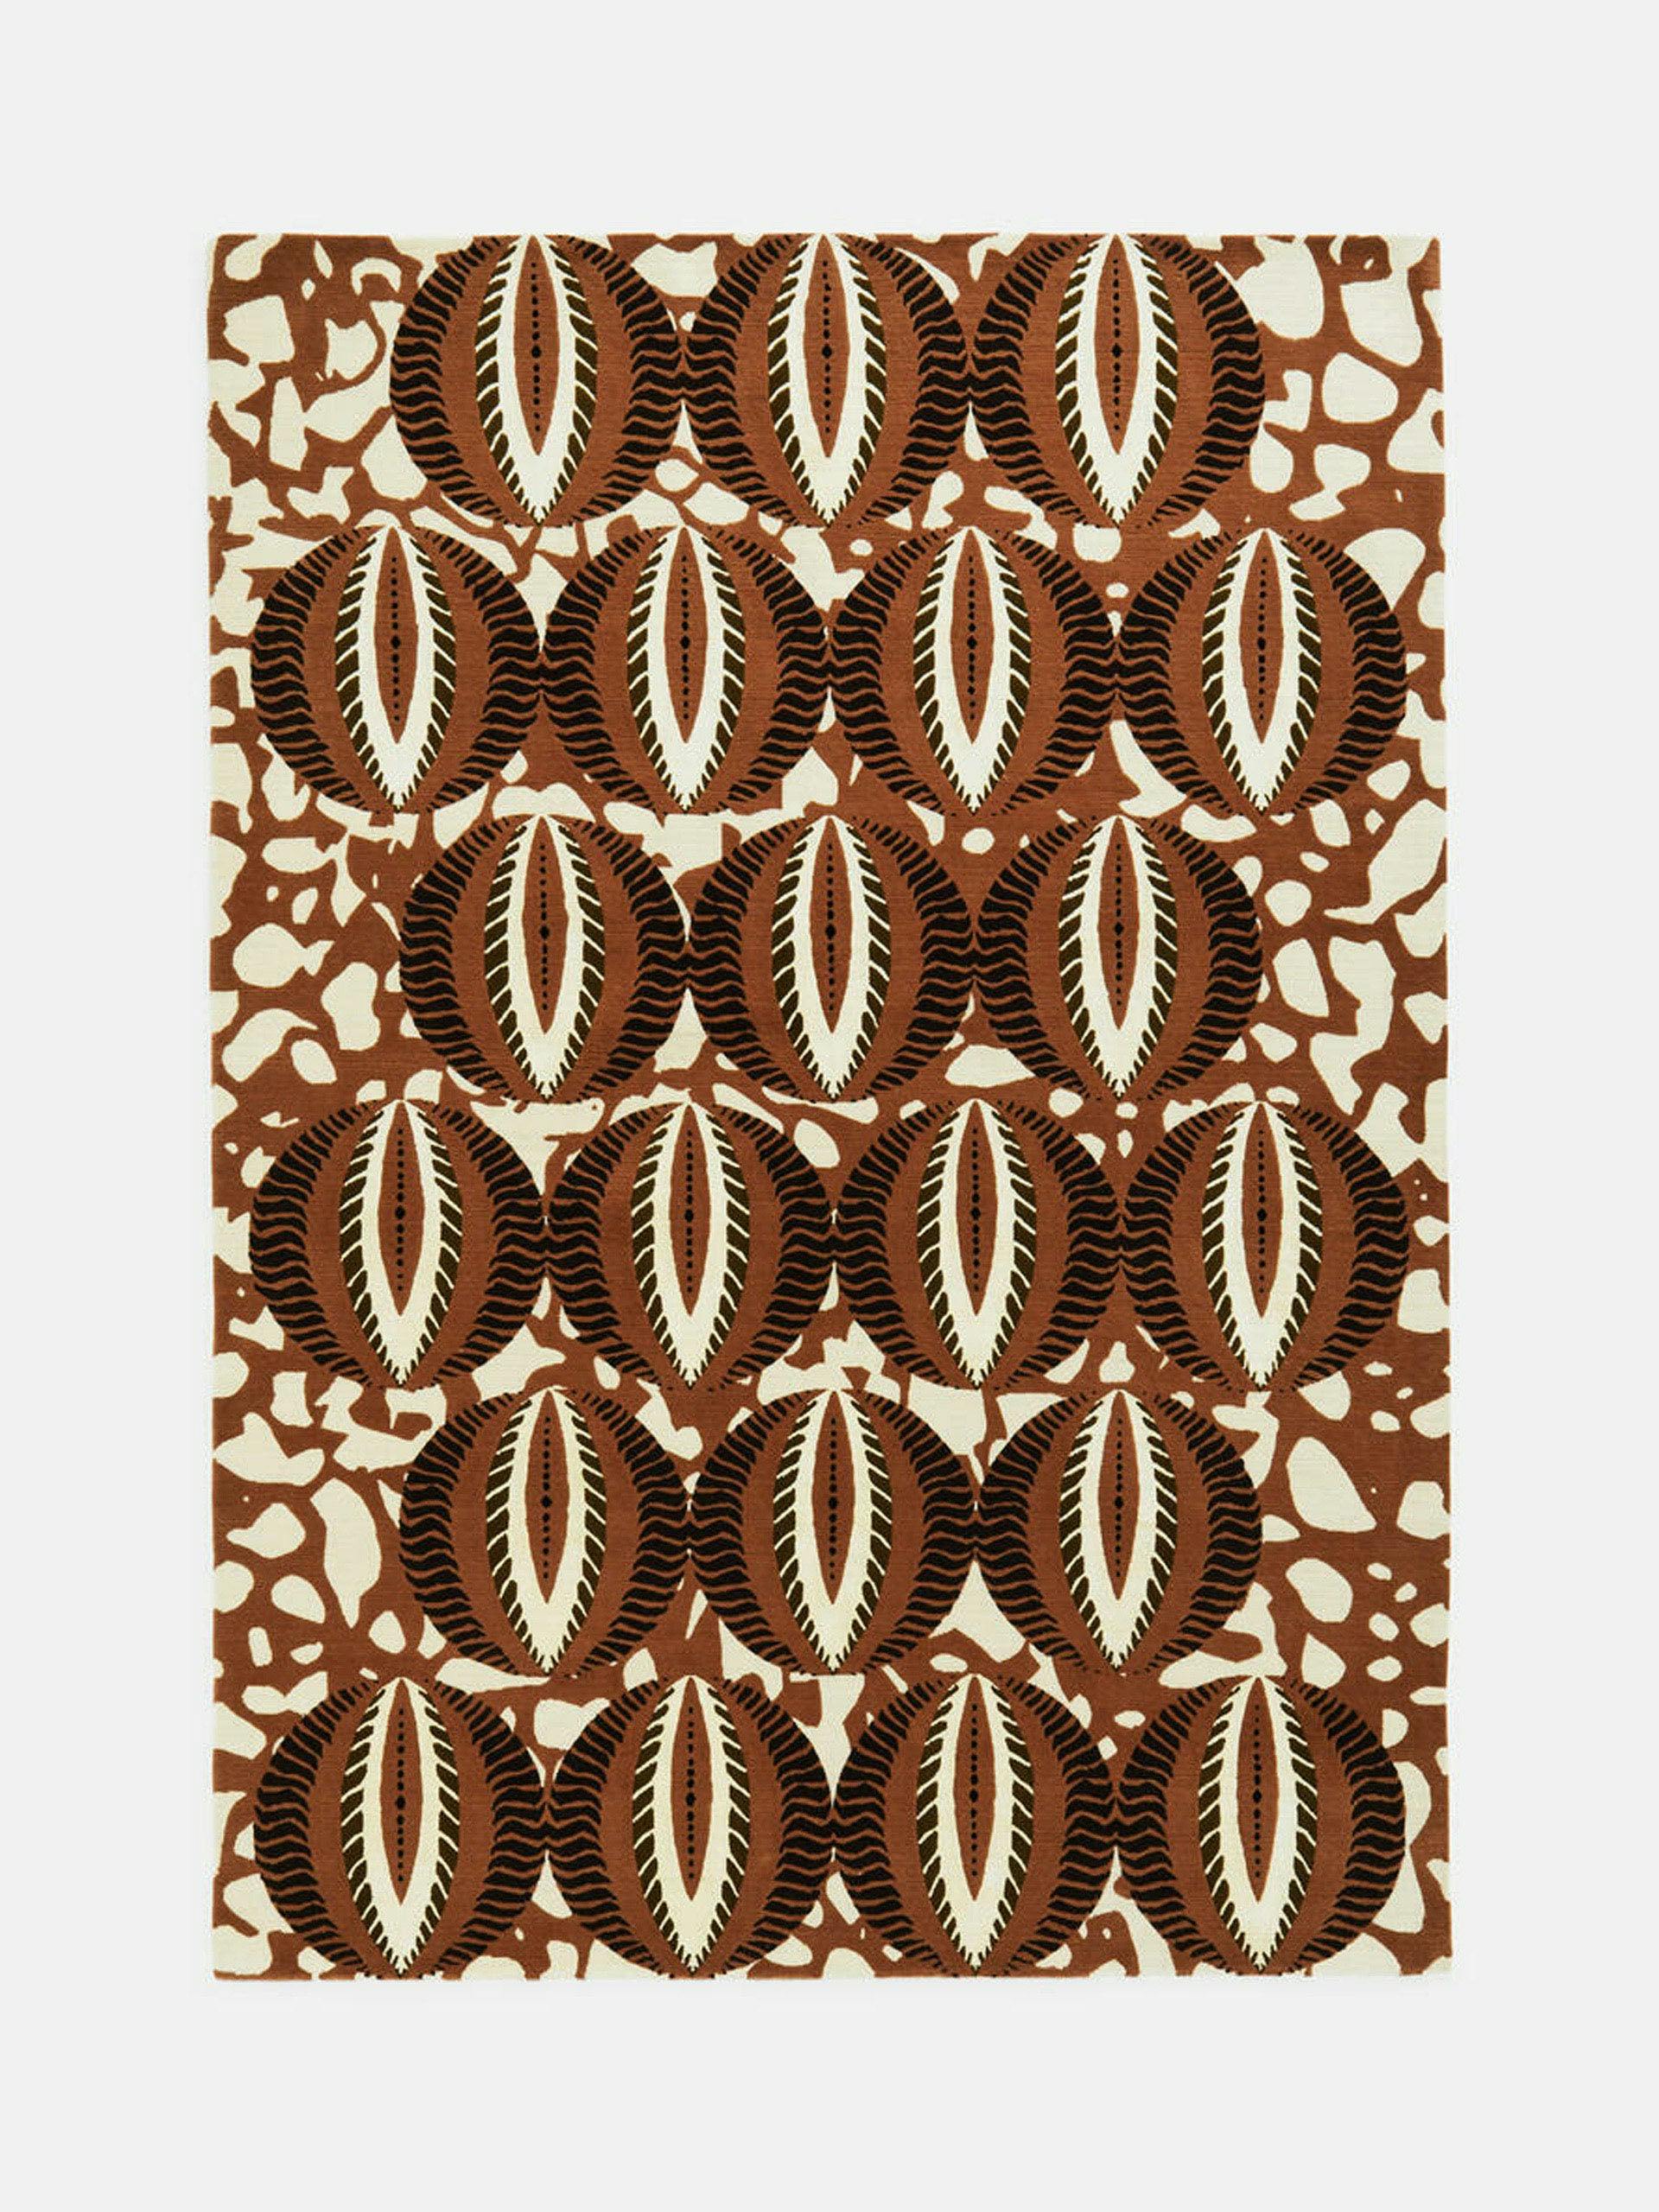 West African inspired rug